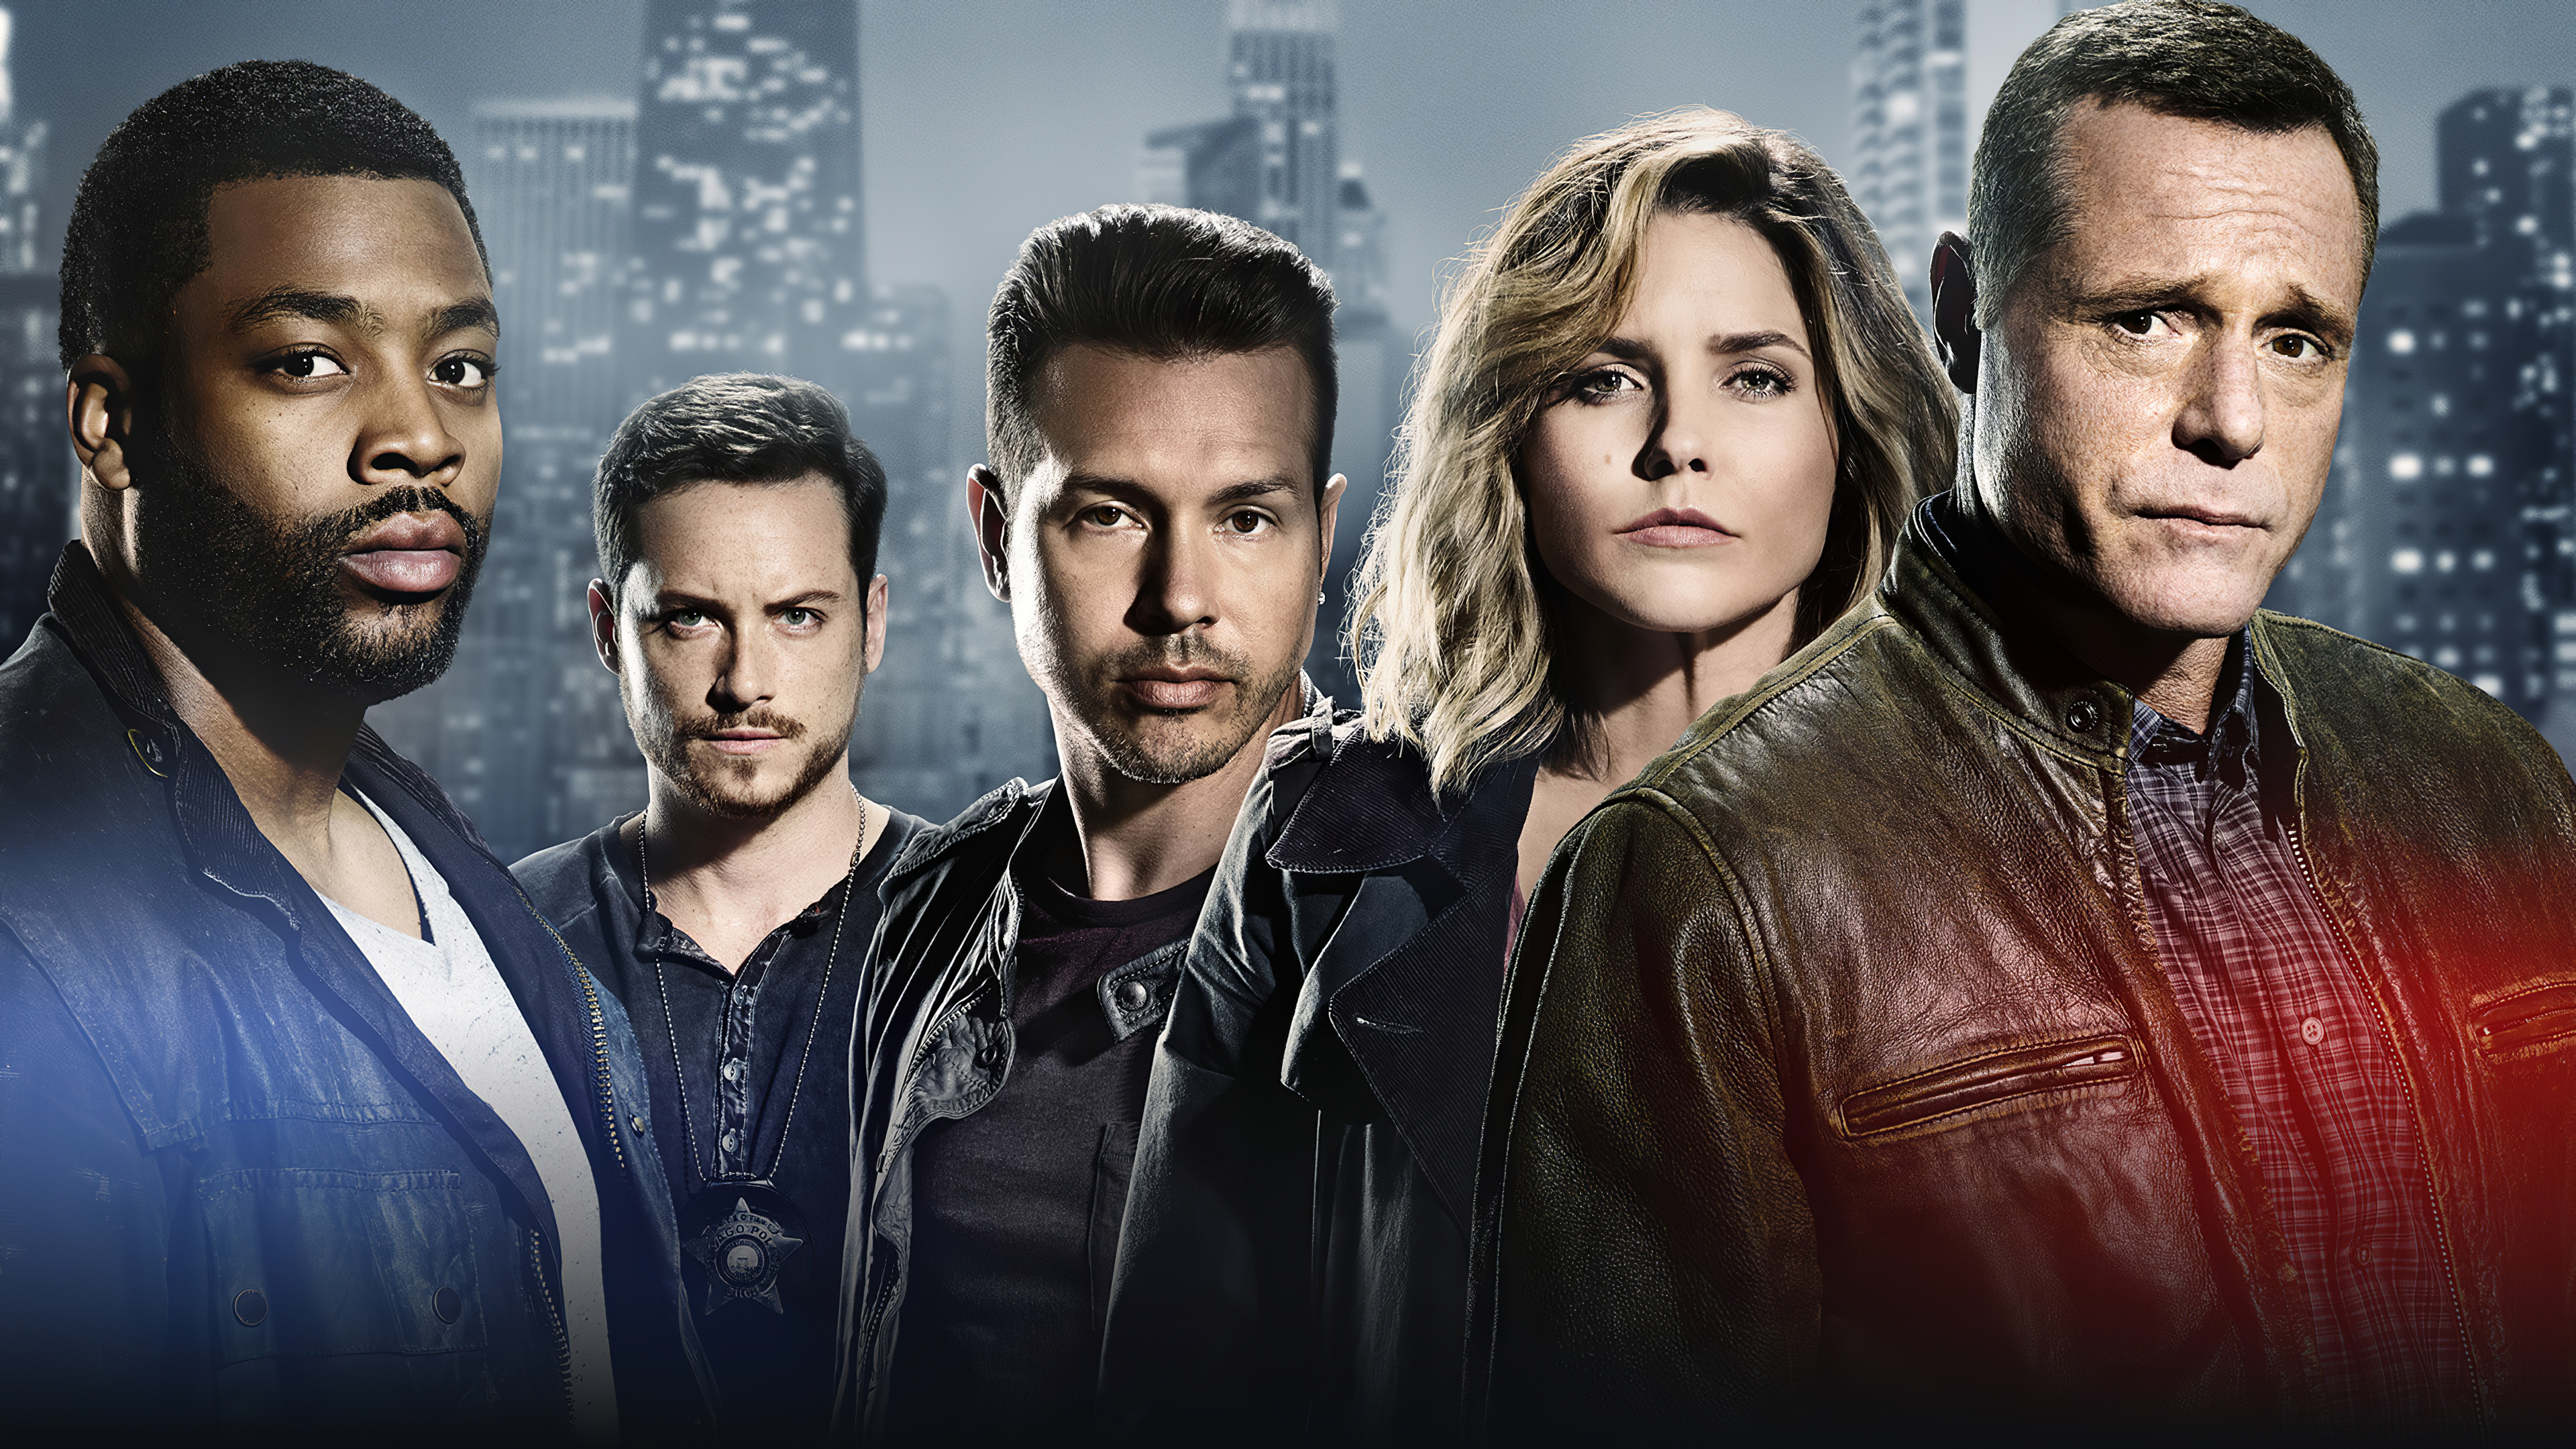 TV Show Chicago P.D. HD Wallpaper | Background Image